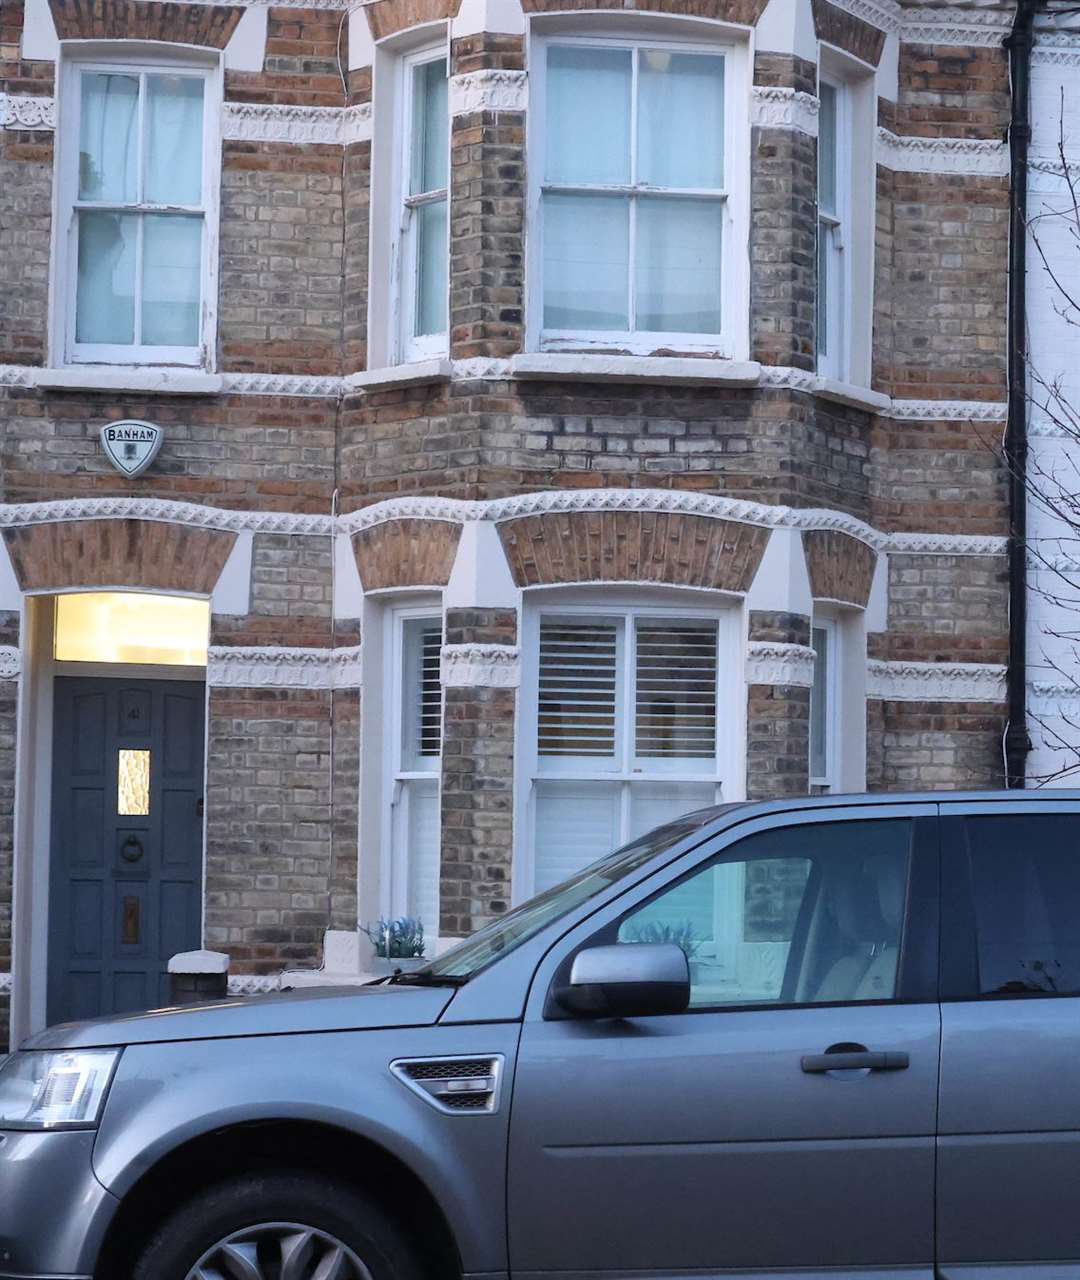 Disgraced ex-MP Charlie Elphicke's Fulham pad, where he is living following his release from prison (his home is in the centre) Picture: UKNIP